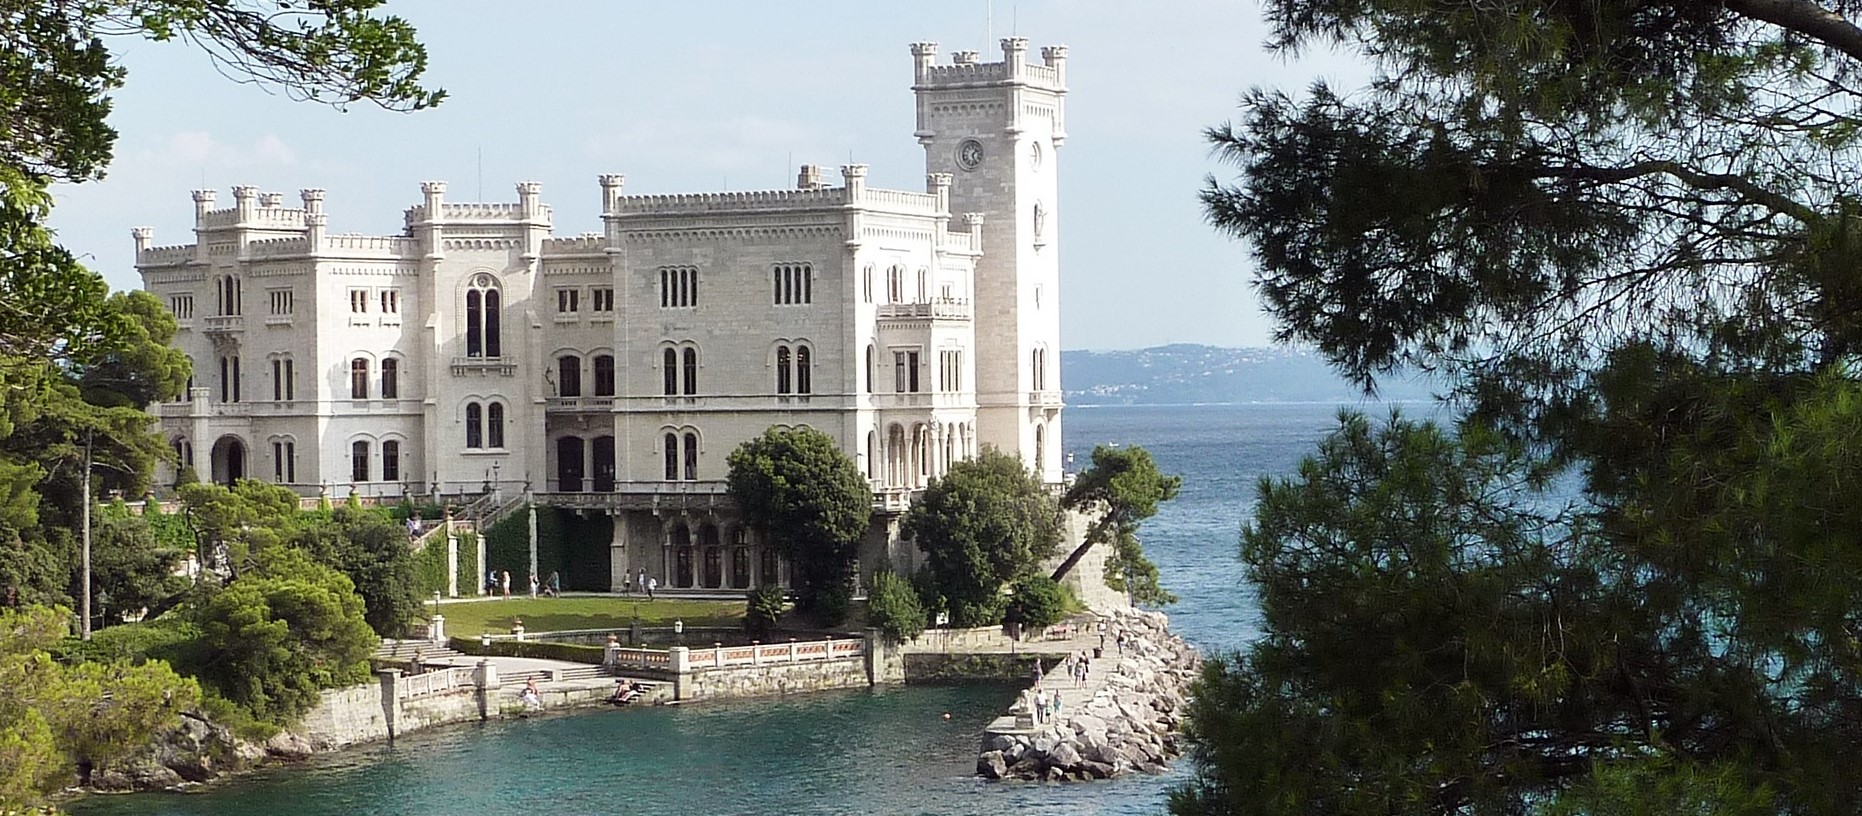 Miramare Castle in northeastern Italy, a white castle surrounded by trees overlooking the sea. 